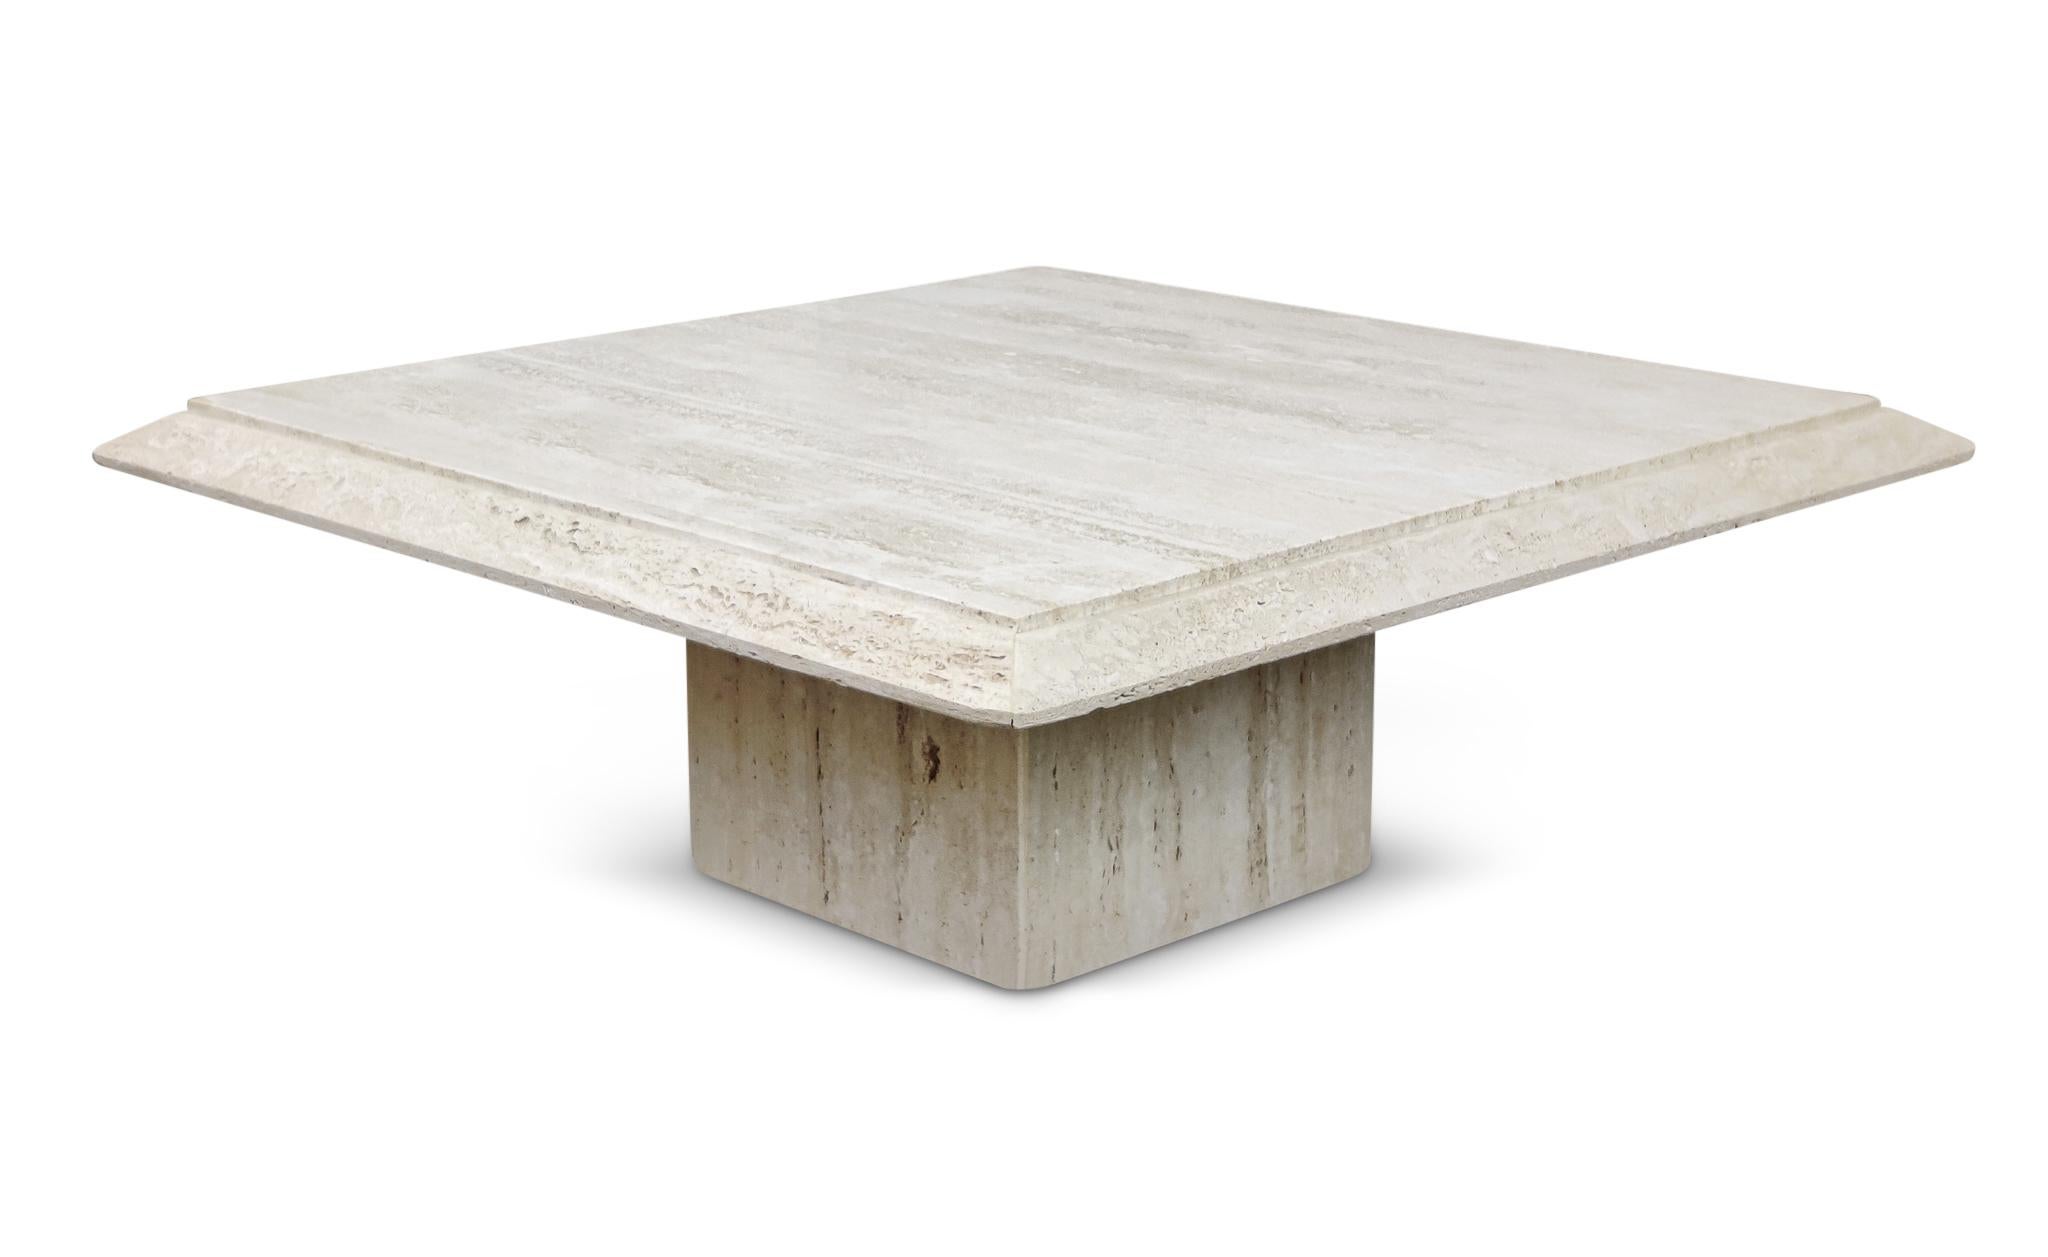 An amazing set of filled and polished tops, travertine-marble tables, with natural and porous travertine edging. The simplicity of the design and surface treatments is what makes this set a classic example of strong and stoic Italian Minimalist